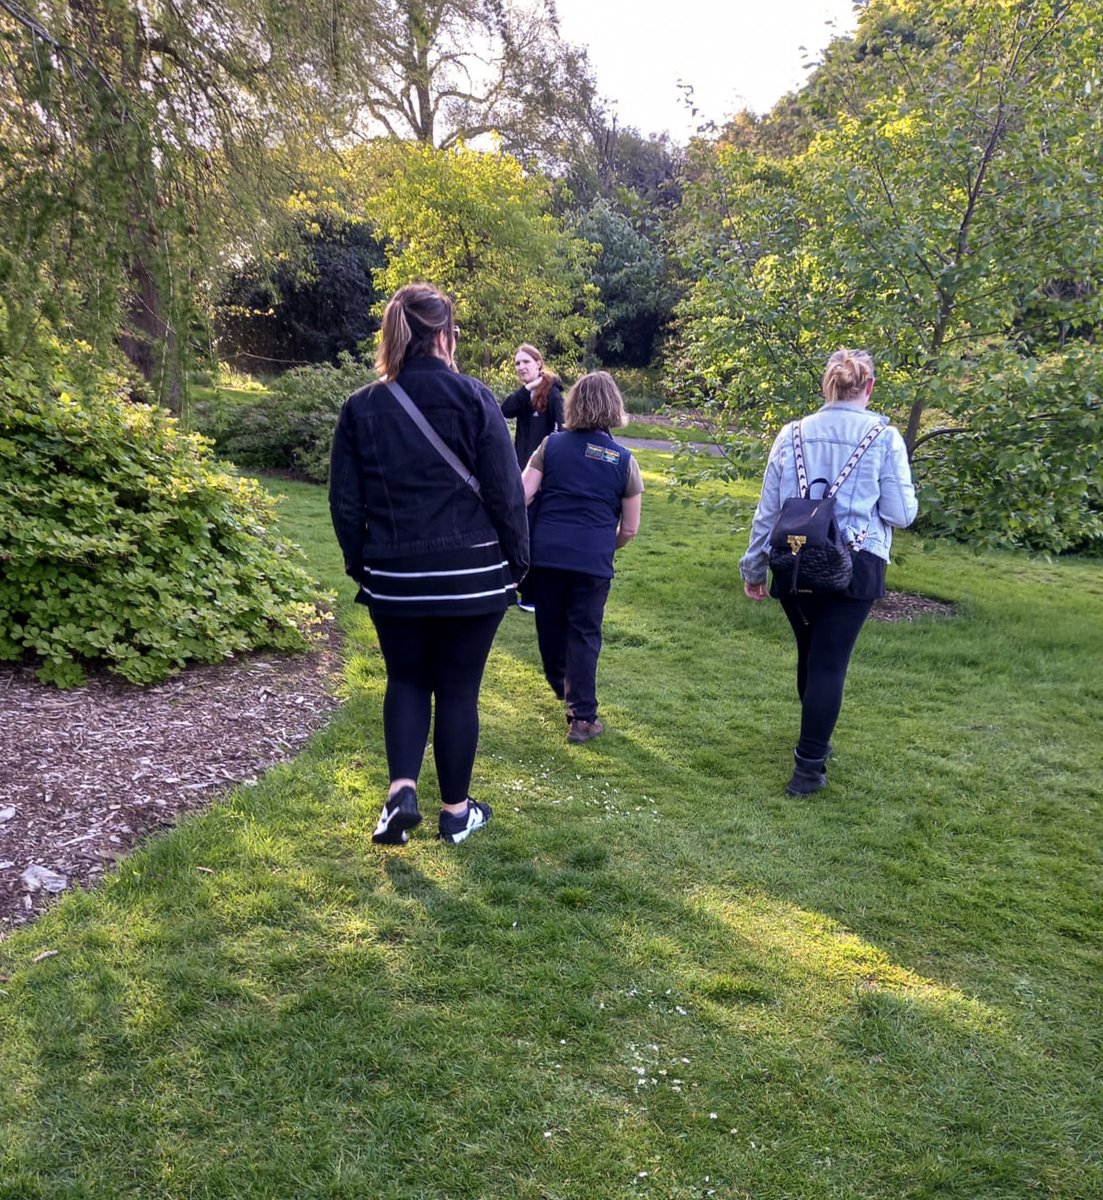 PHEW members recently visited @TheBotanics for a tour of the beautiful grounds, gardening session, & a potted pea seed to take home & grow. Big thanks to the Botanics' Elinor for leading a 'very educational night' with the group. #PHEW #WellbeingTogetherSouthWest #gardening